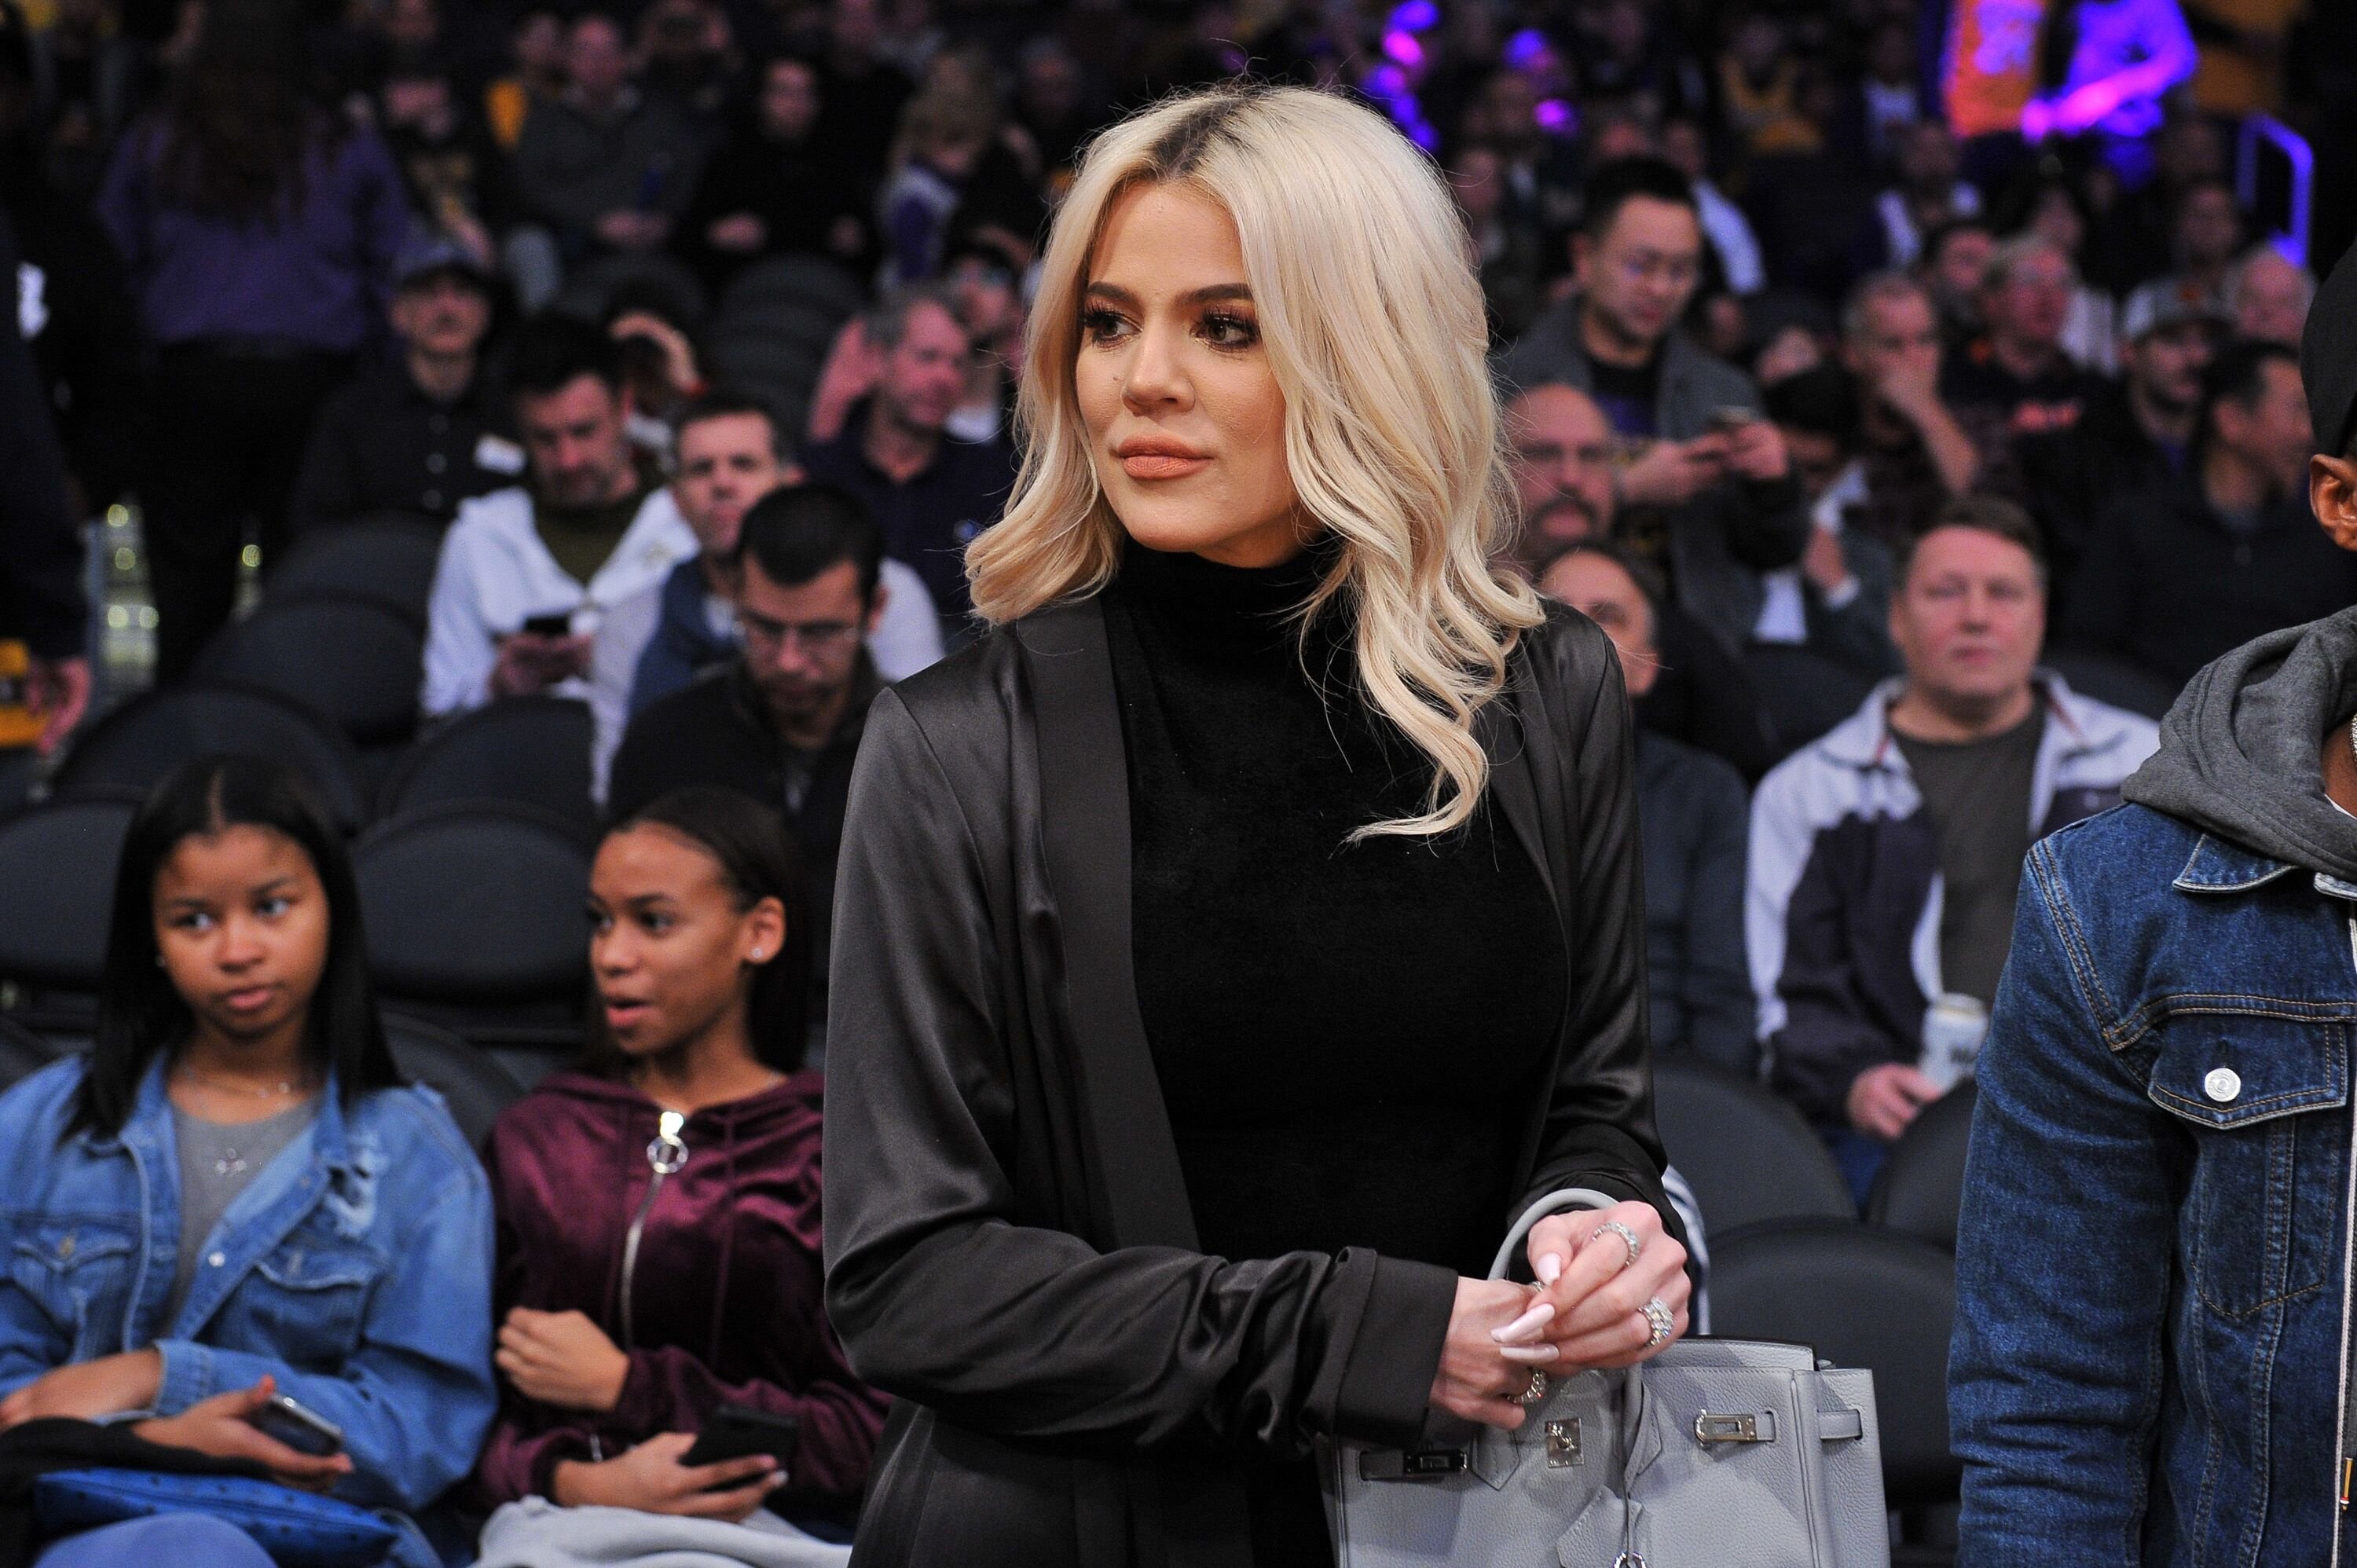 Khloe Kardashian at a basketball game between the Los Angeles Lakers and the Cleveland Cavaliers on January 13, 2019, in California | Photo: Allen Berezovsky/Getty Images